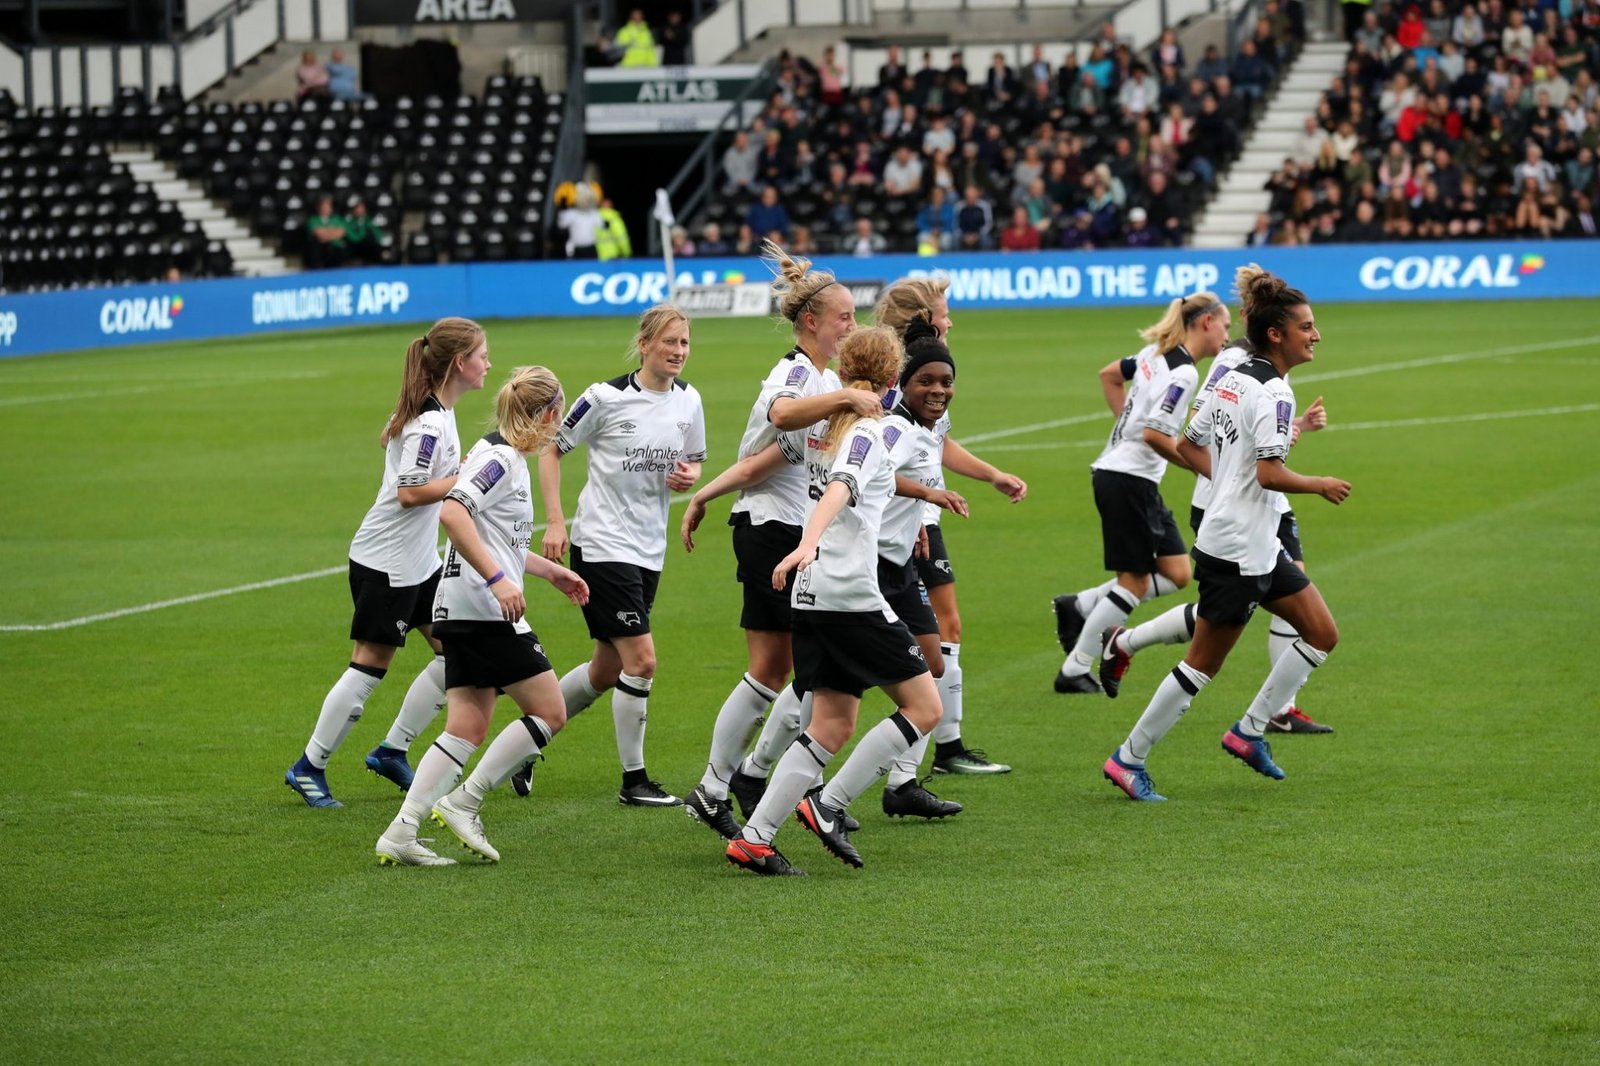 Derby County play at Pride Park